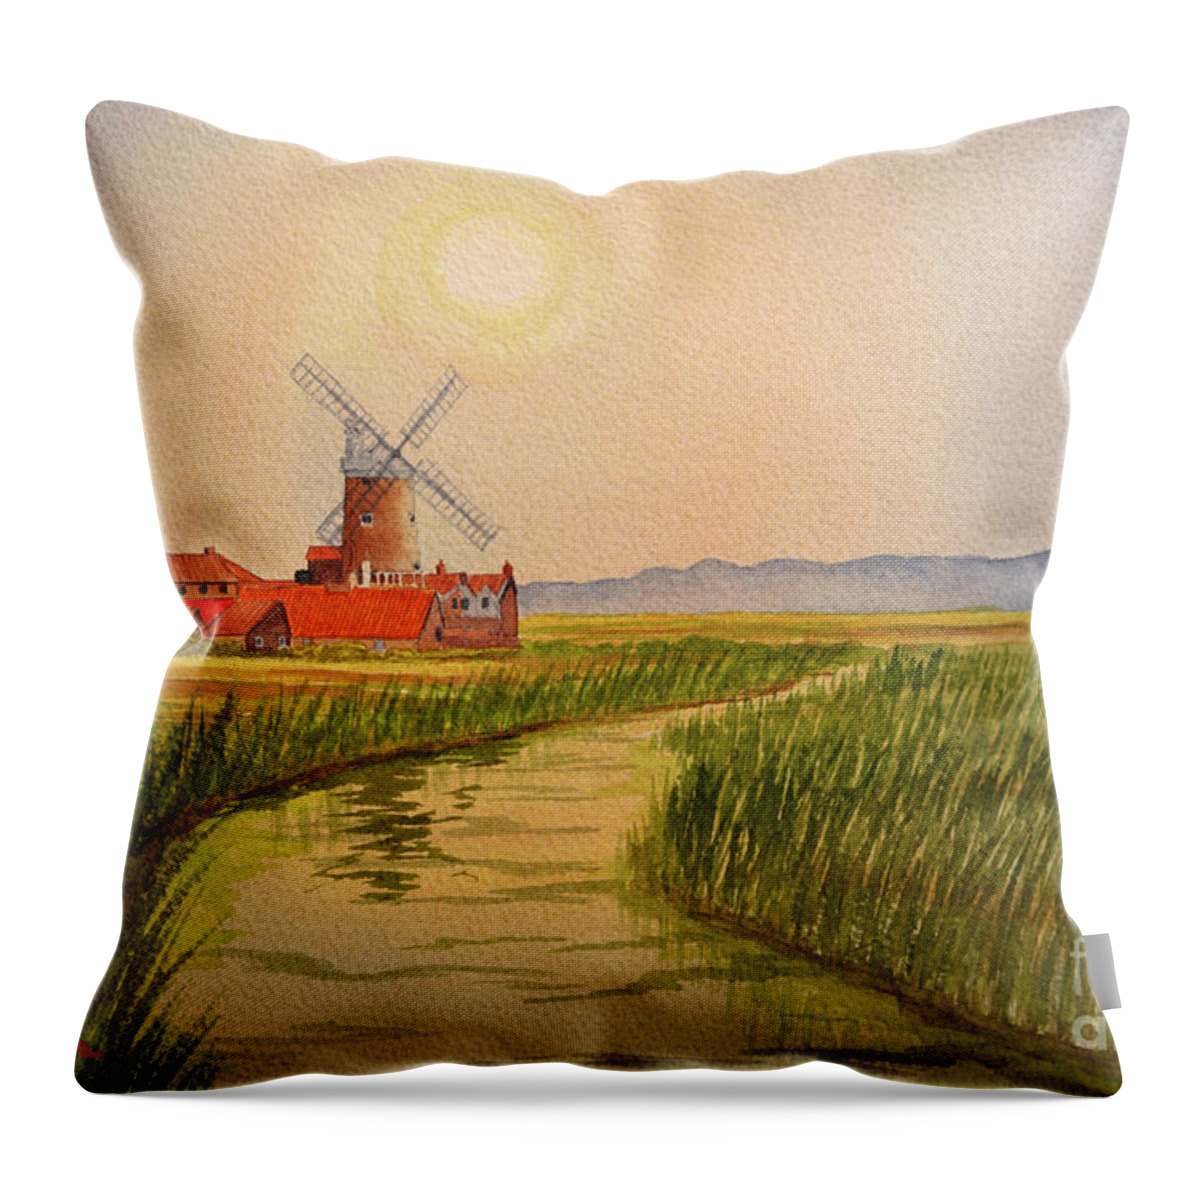 Cley Windmill Norfolk Throw Pillow featuring the painting Cley Windmill And Marshes Norfolk England by Bill Holkham